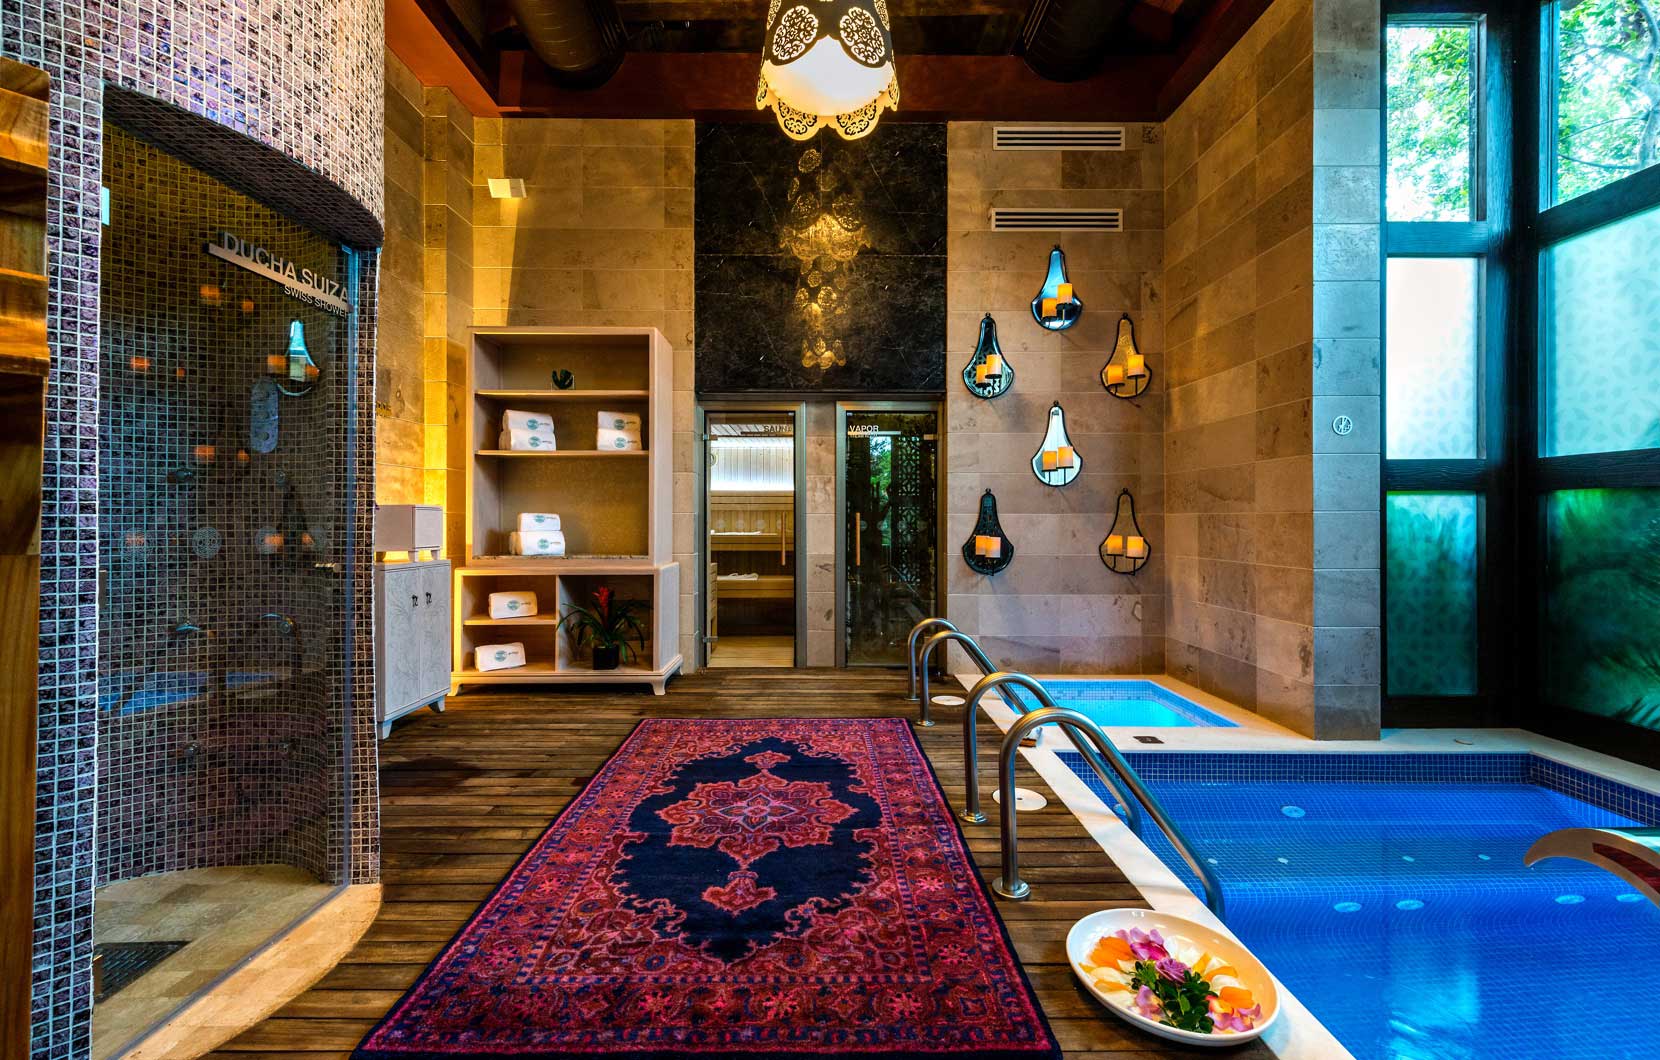 Visit the Hydrotherapy Annex at Spatium to get that fresh-from-the-sauna skin.